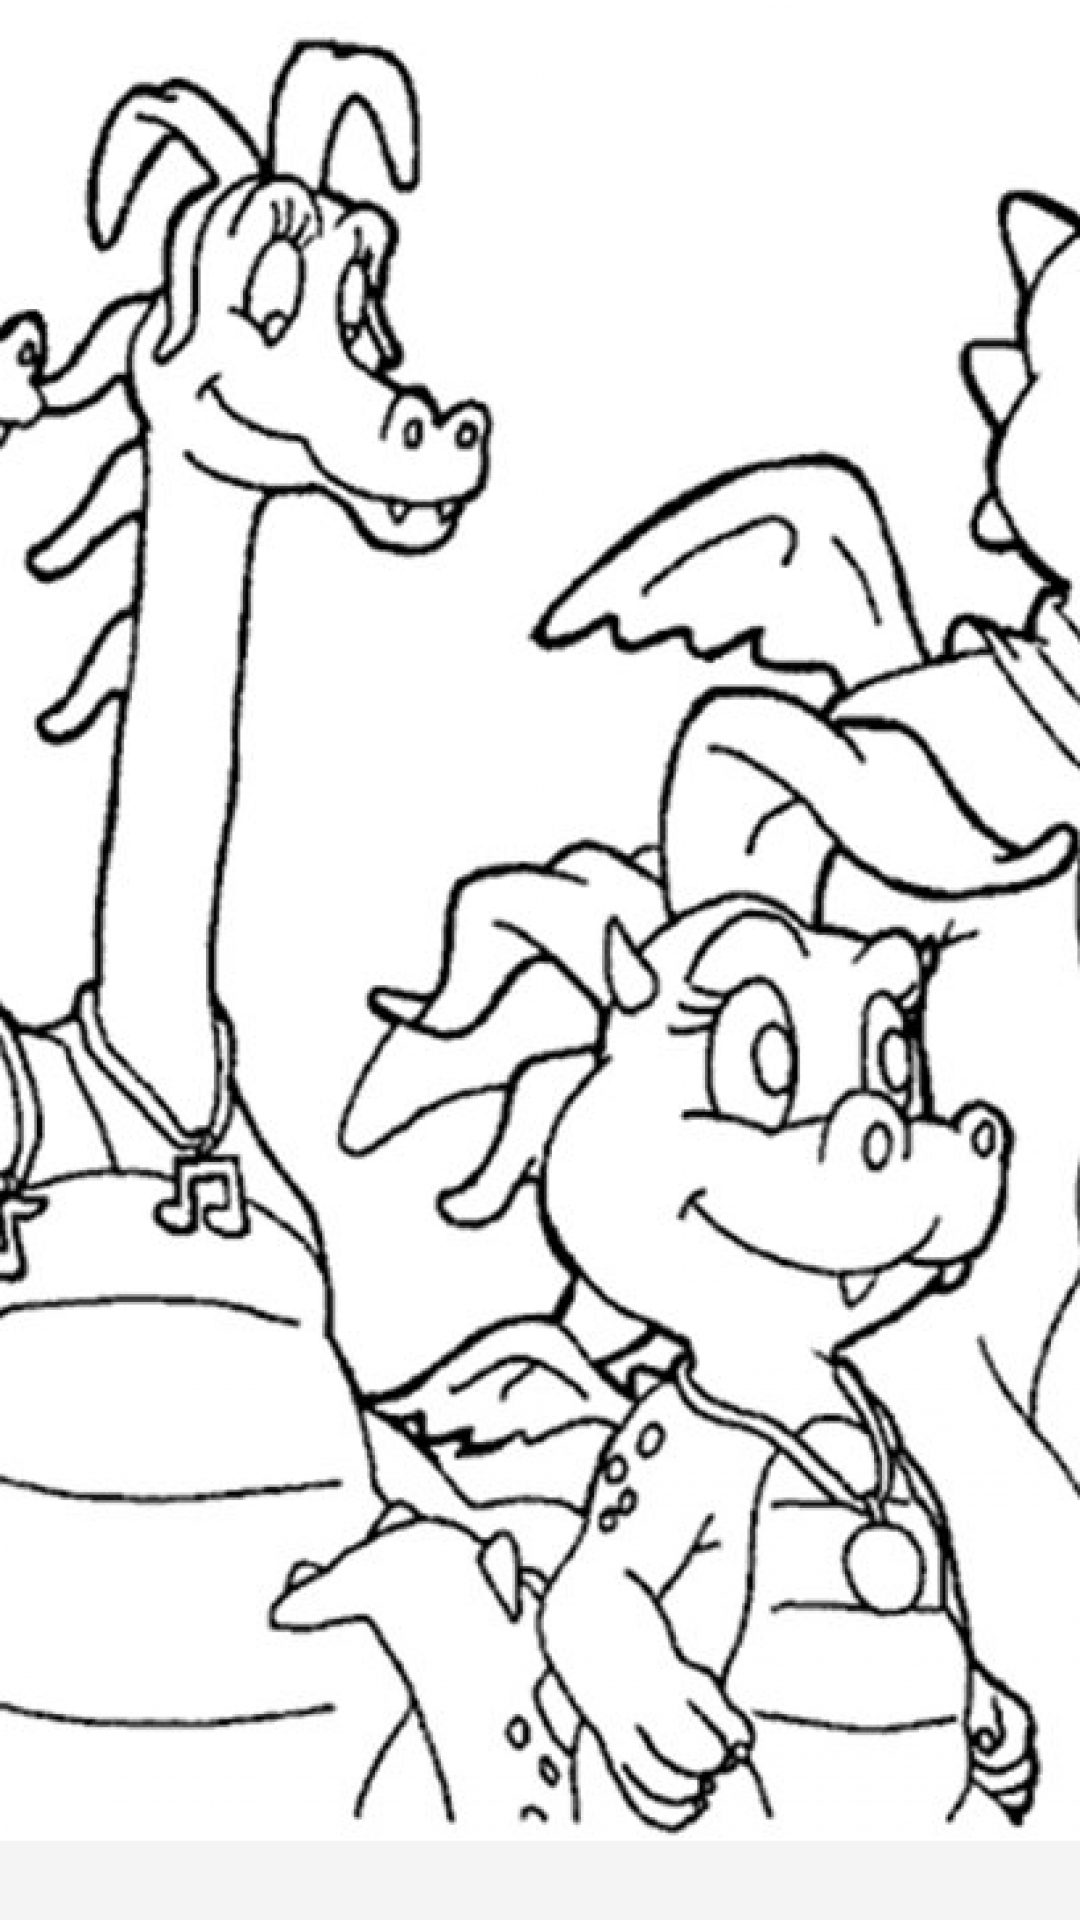 Dragon Tales Coloring Pages at GetDrawings | Free download